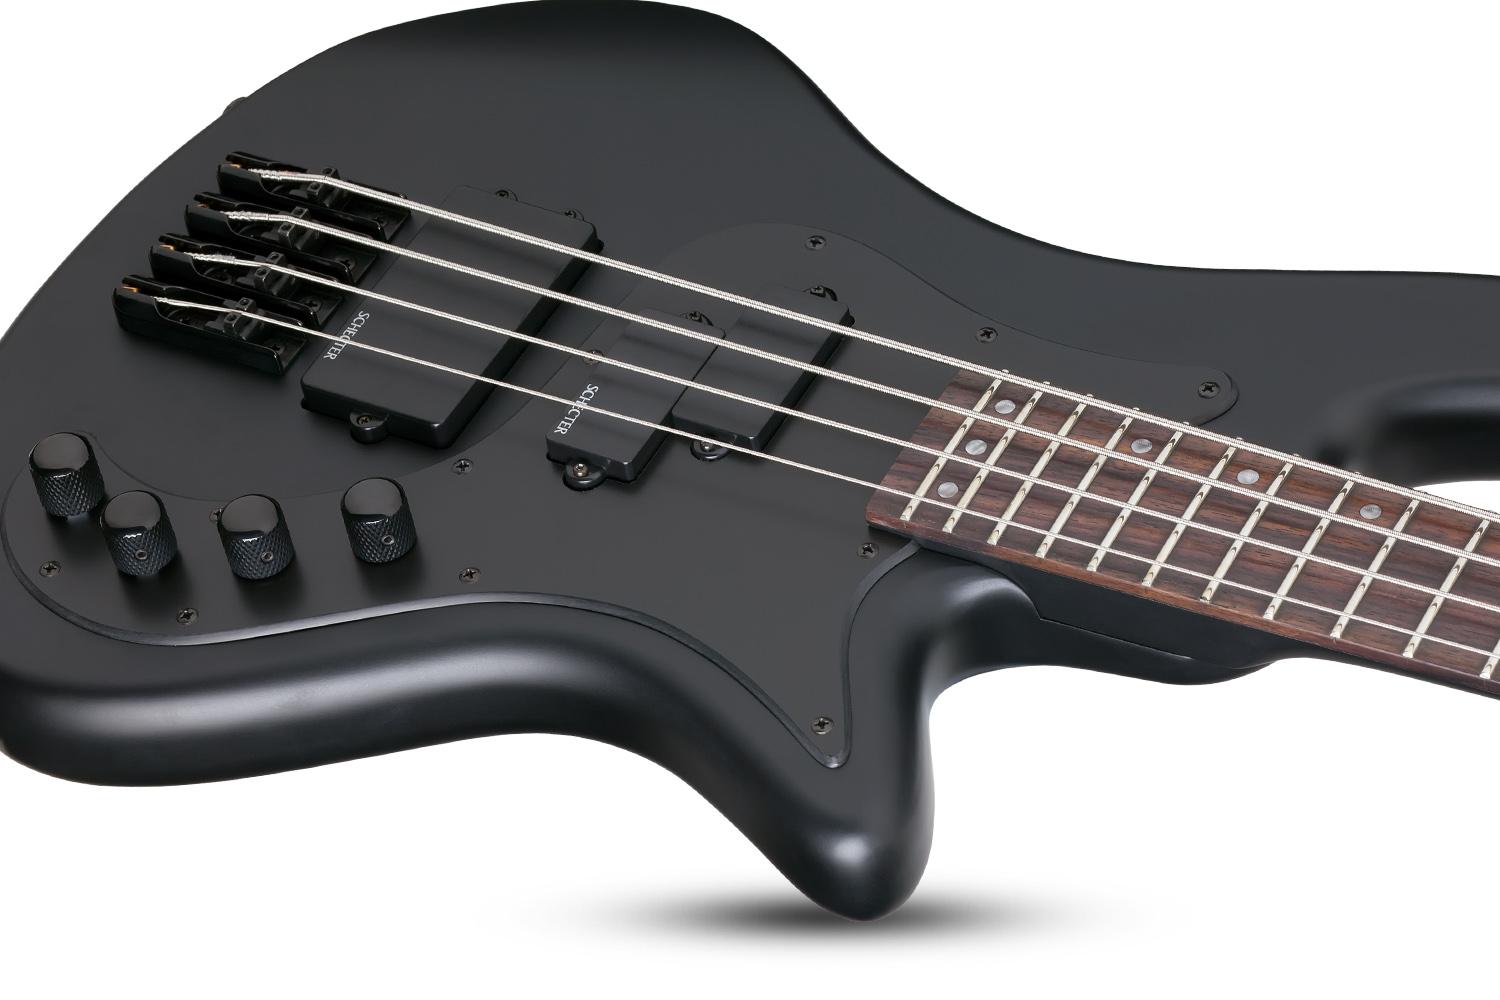 Schecter Stiletto Stealth 4c Active Rw - Satin Black - Solid body electric bass - Variation 3